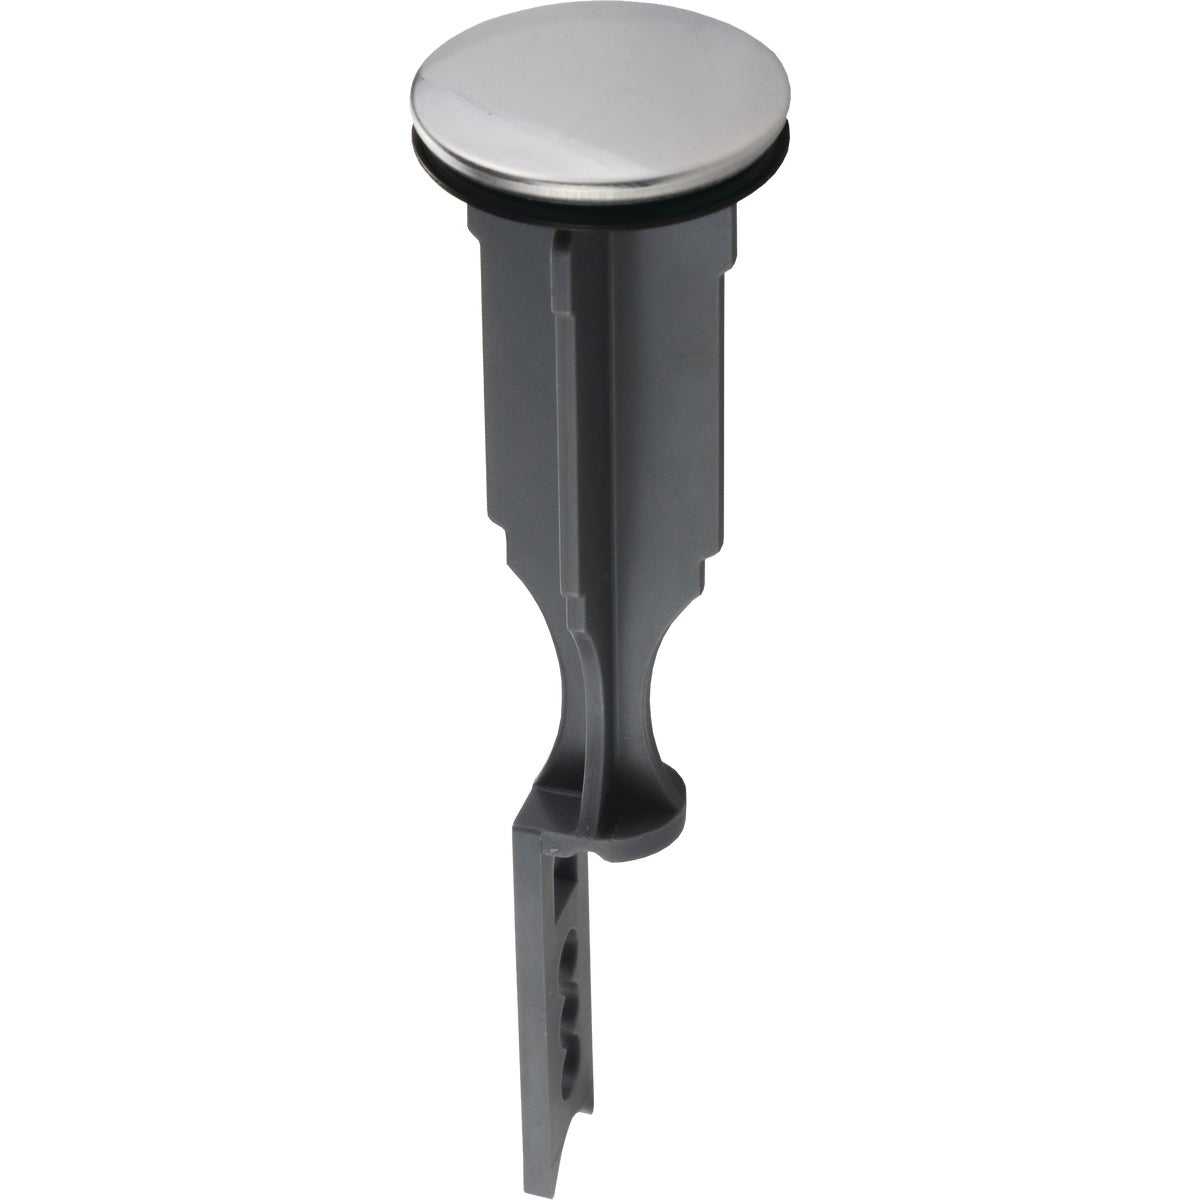 Item 403171, The Danco Bathroom Sink Pop-up Stopper is the perfect replacement for your 